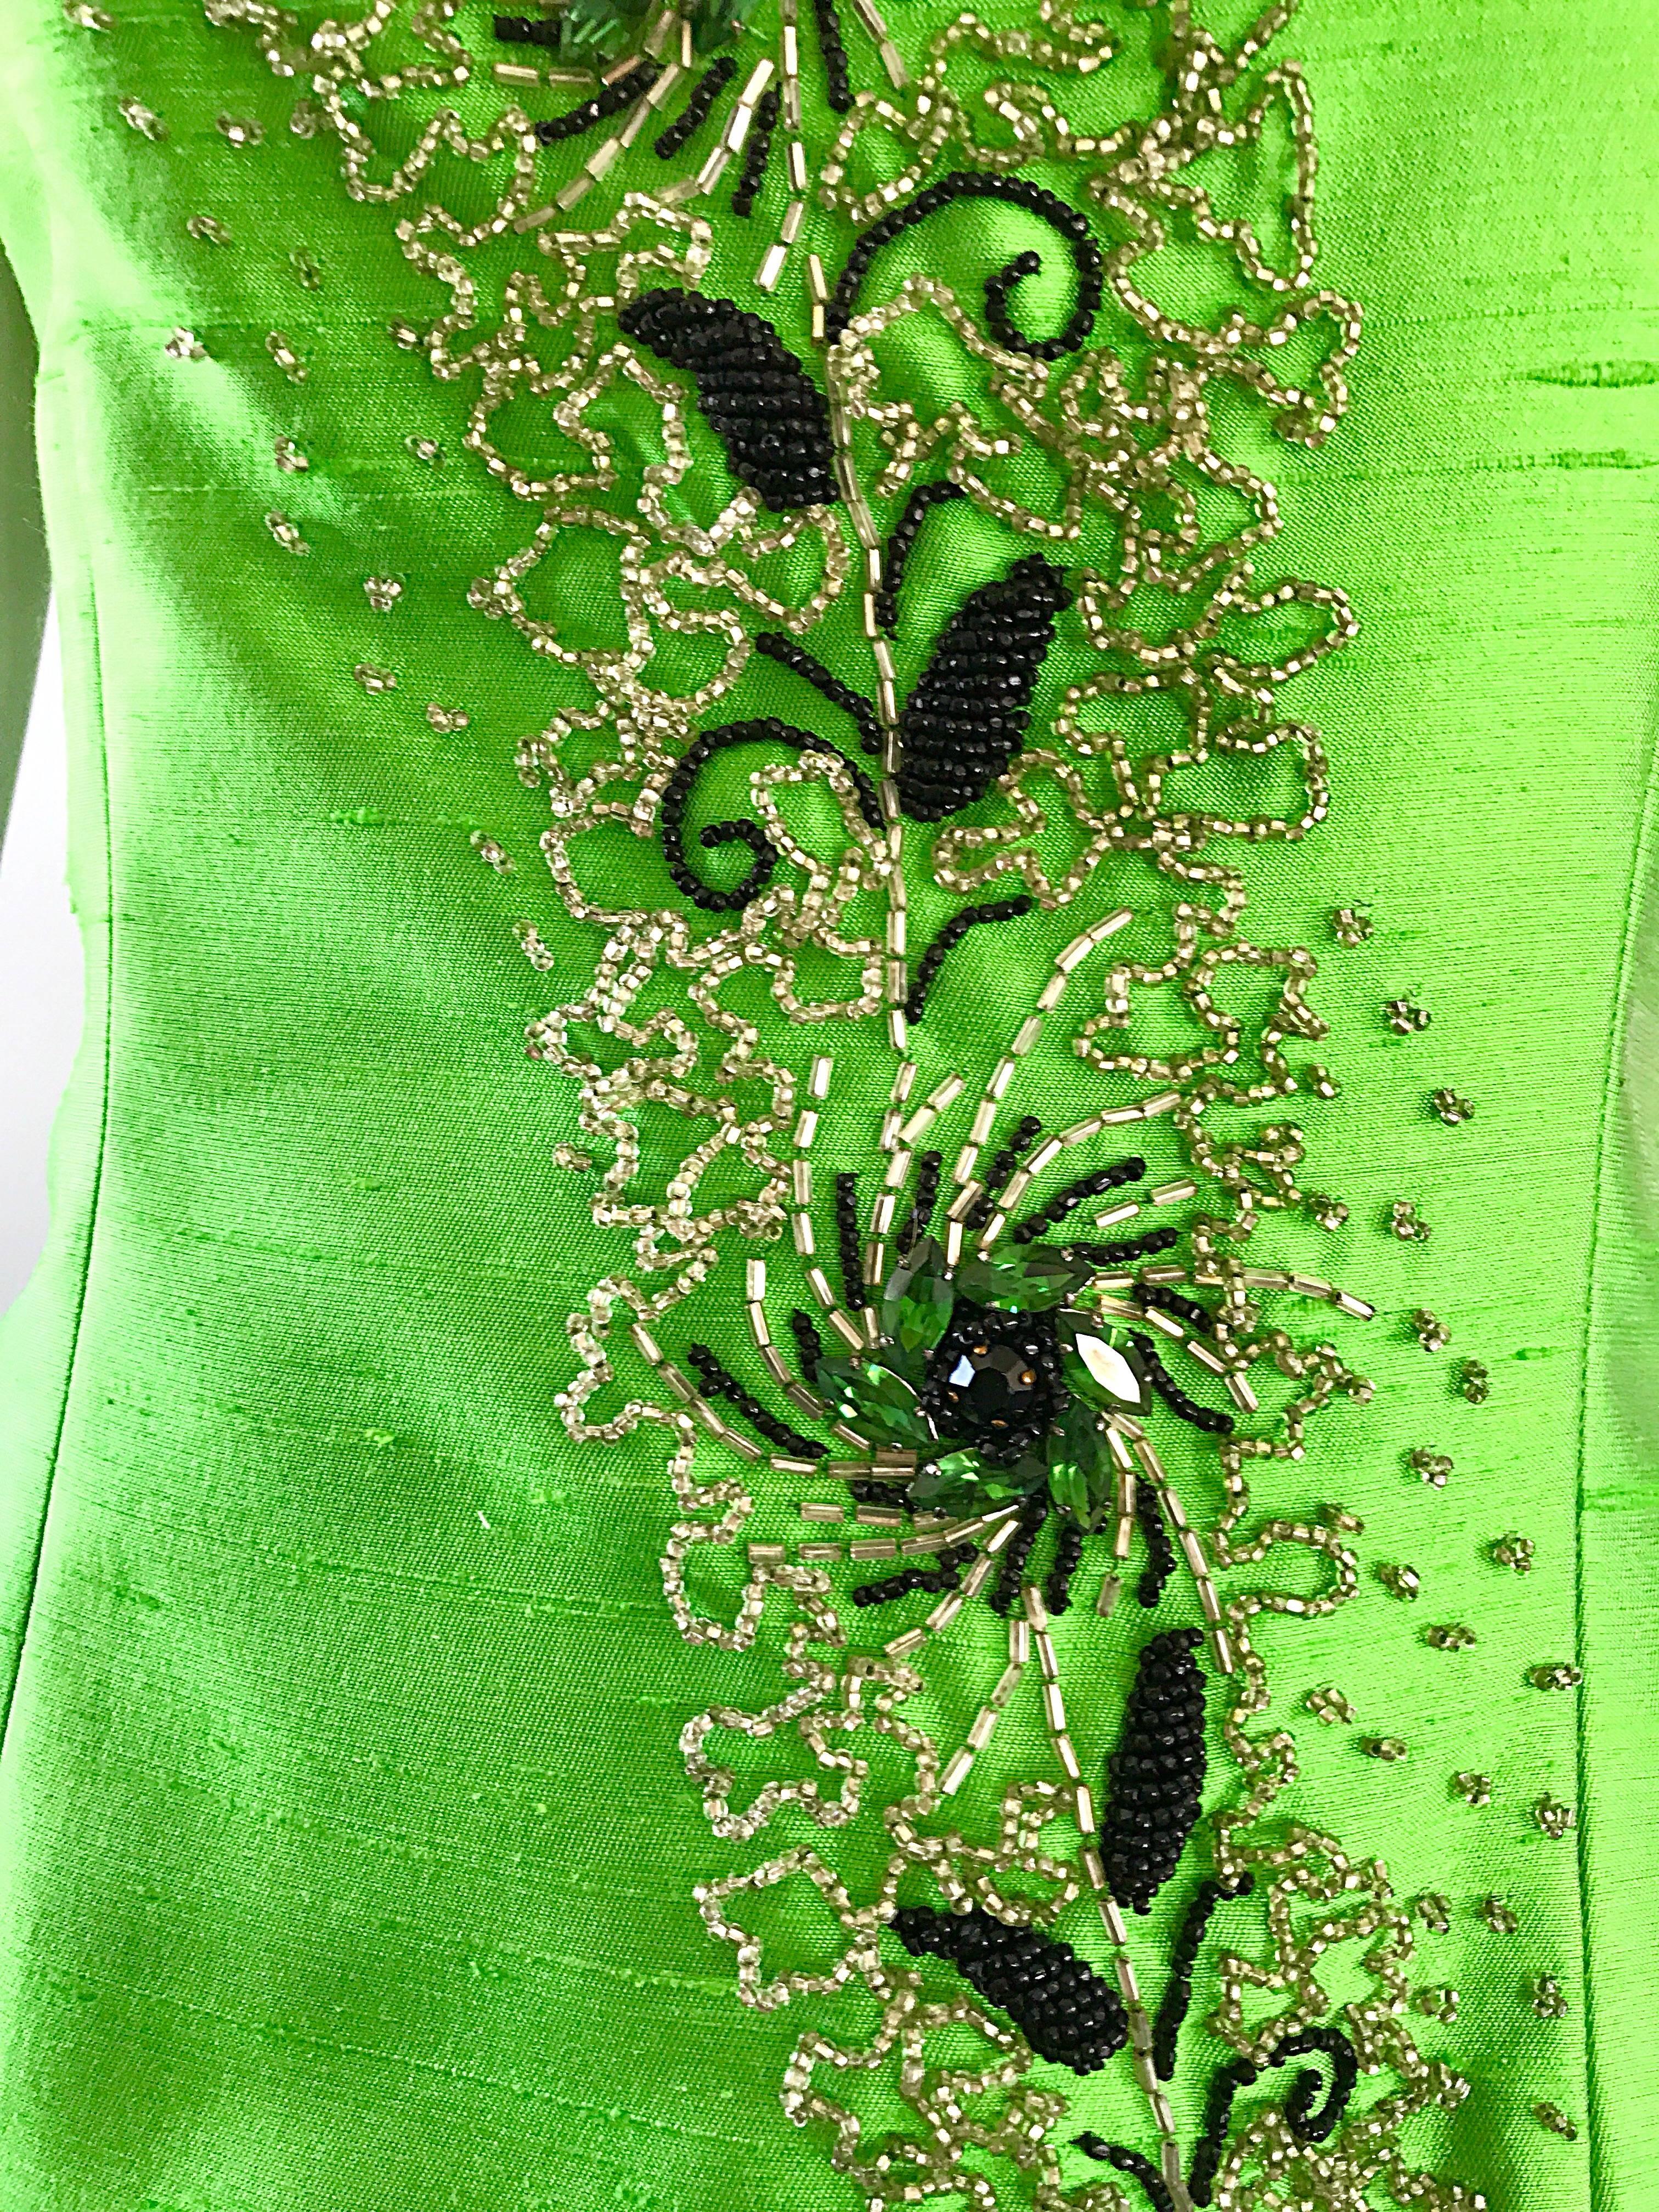 Stunning 1950s green raw silk shantung couture beaded top! Features hundreds of hand-sewn beads and crystals throughout the front bodice. Full metal zipper up the back with hook-and-eye closure. Heavy attention to detail, with couture quality.